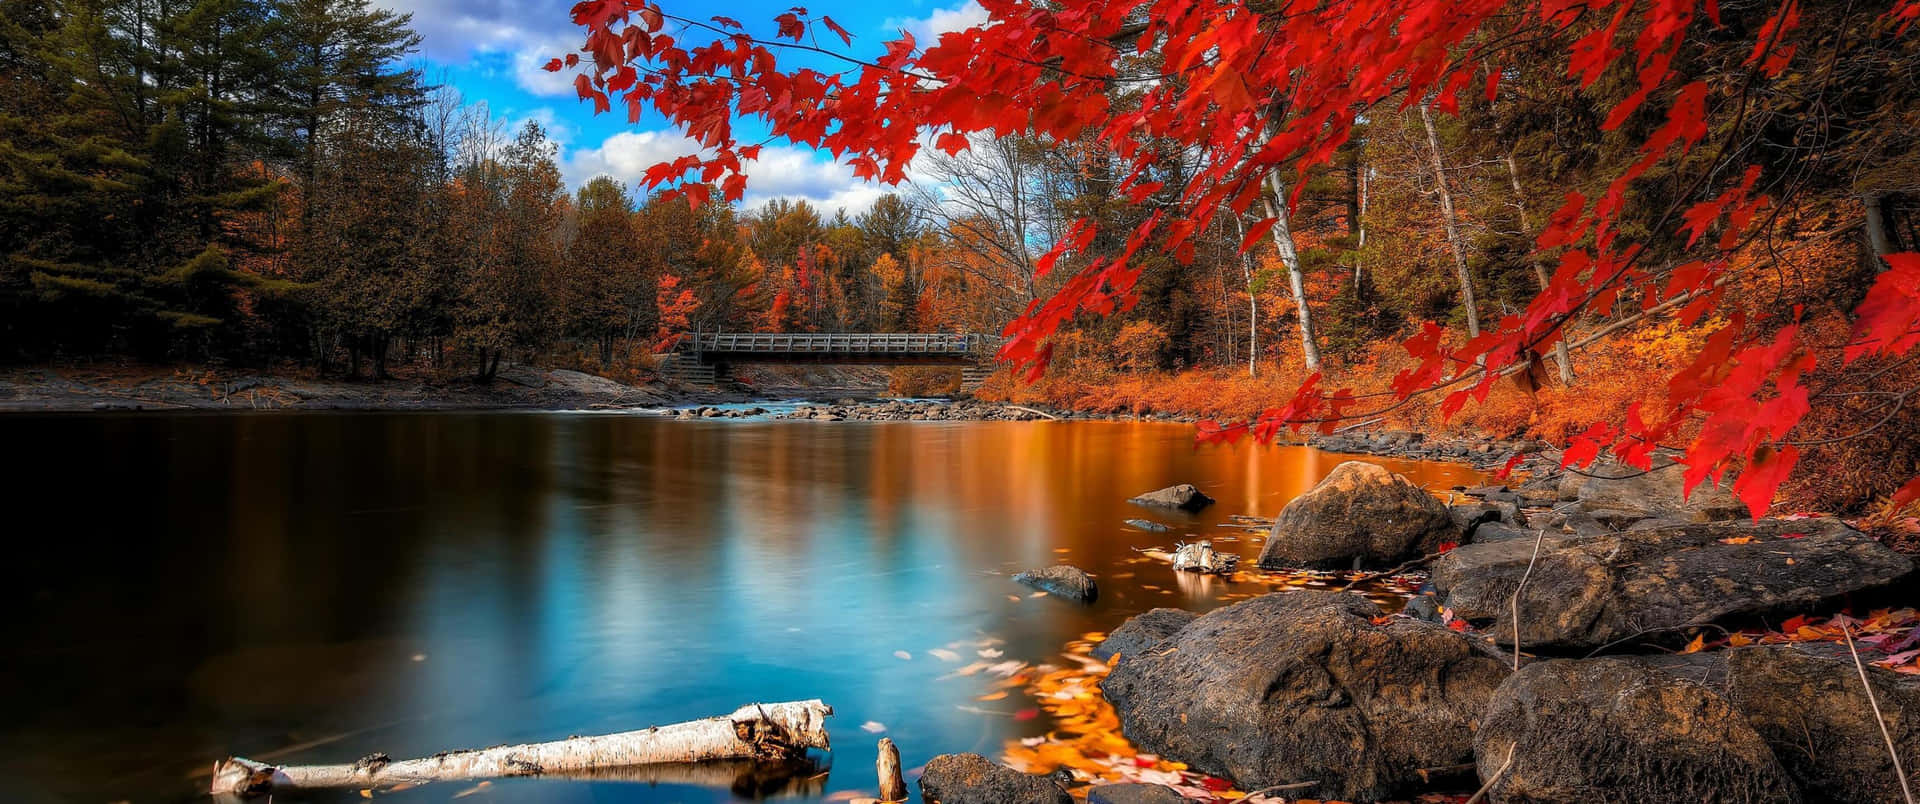 Enjoy the Colors of Fall Wallpaper